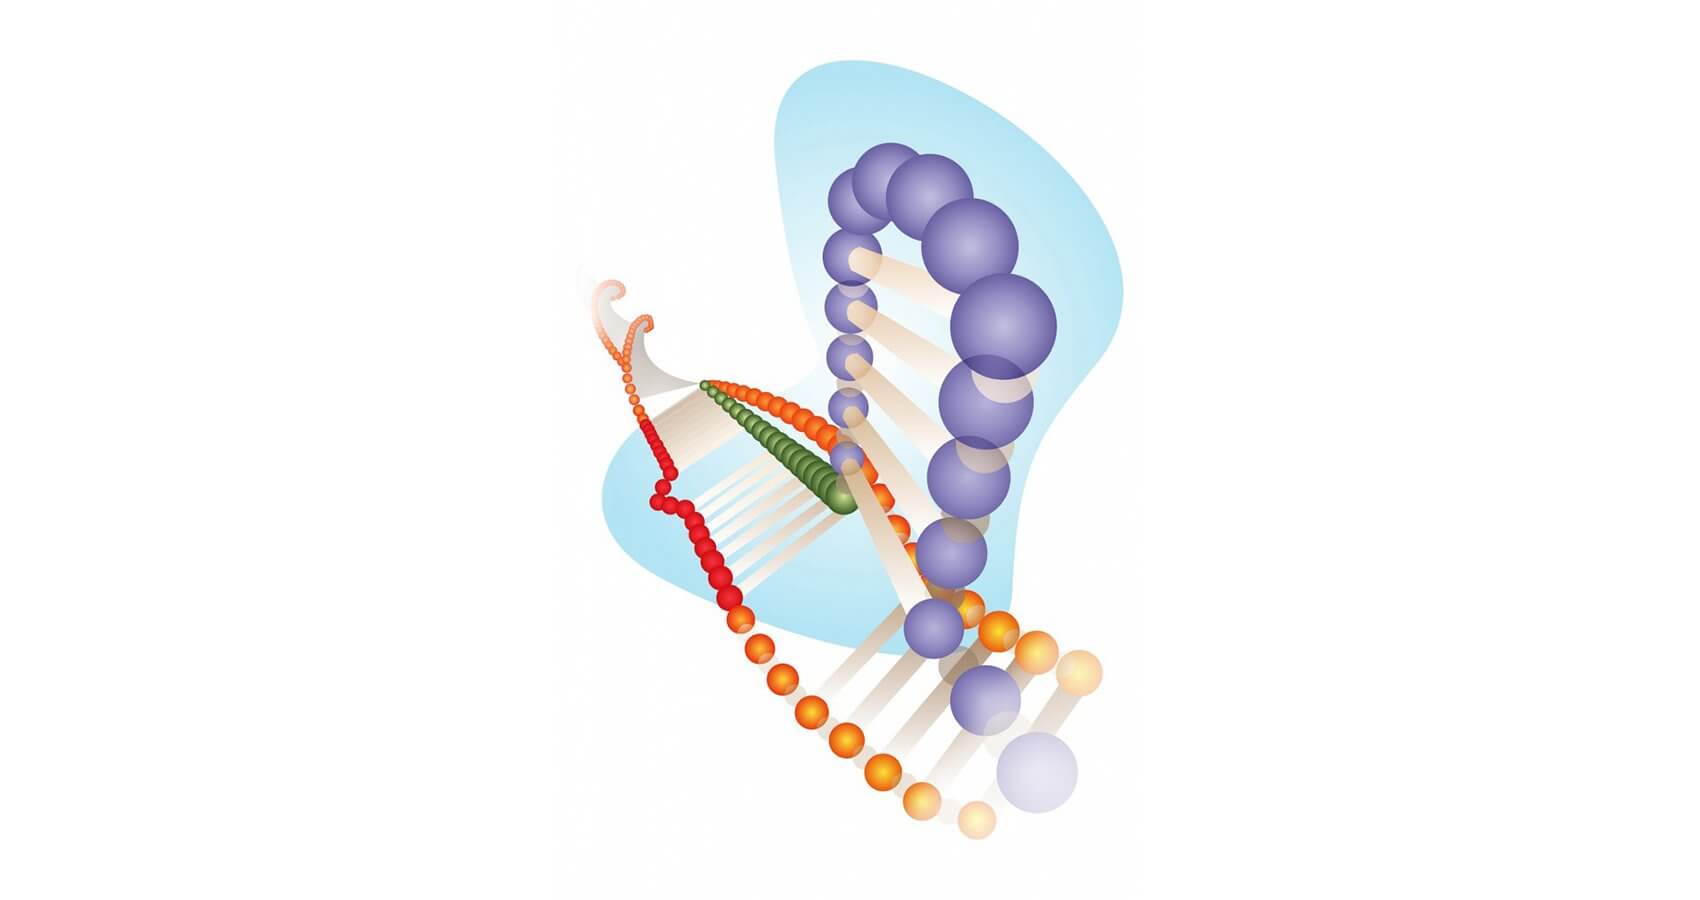 A Cas9 protein (light blue) with guide RNA (purple) and DNA (red) shows a DNA bulge, marking a sequence that would be considered off-target for CRISPR-Cas9 editing. (Courtesy of the Bao Lab/Rice University)